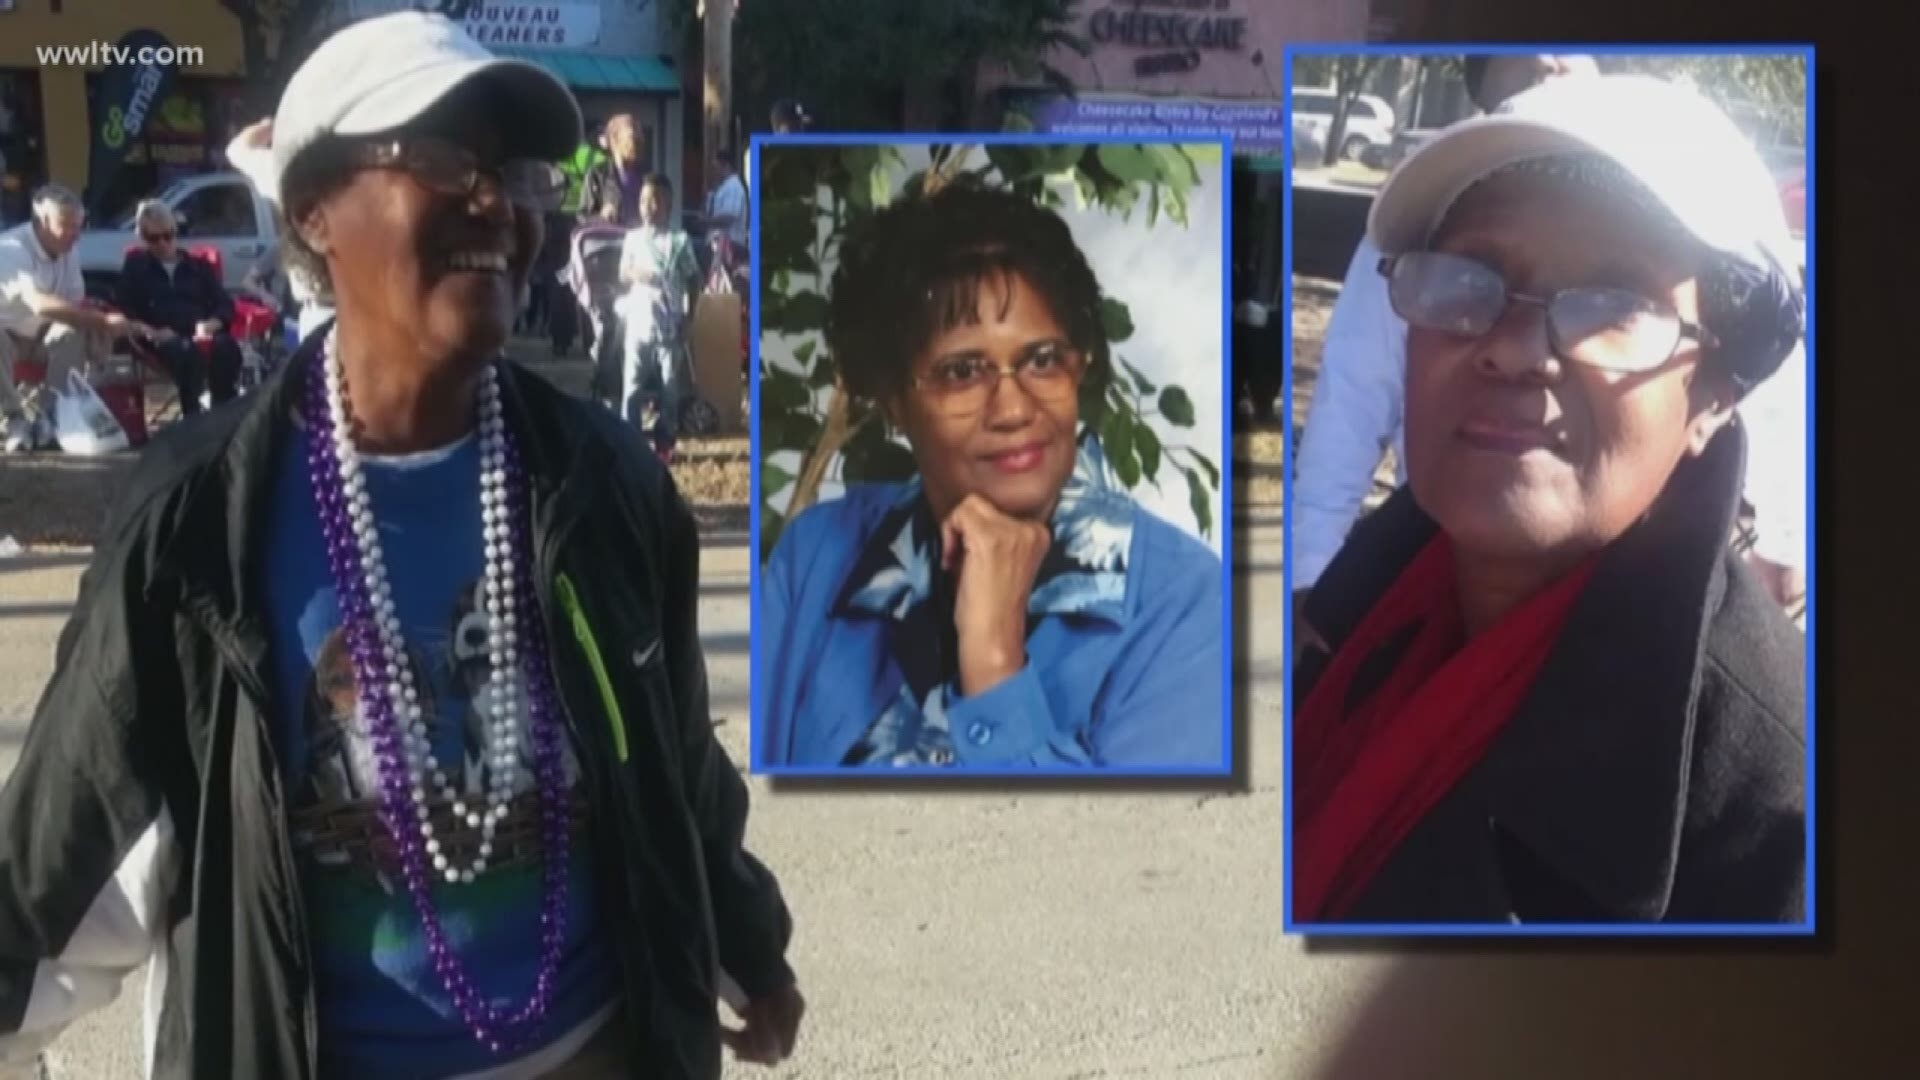 The remains of a 76-year-old woman who had been missing since October have been identified by the State Crime Lab as those of Jean Stokes. 